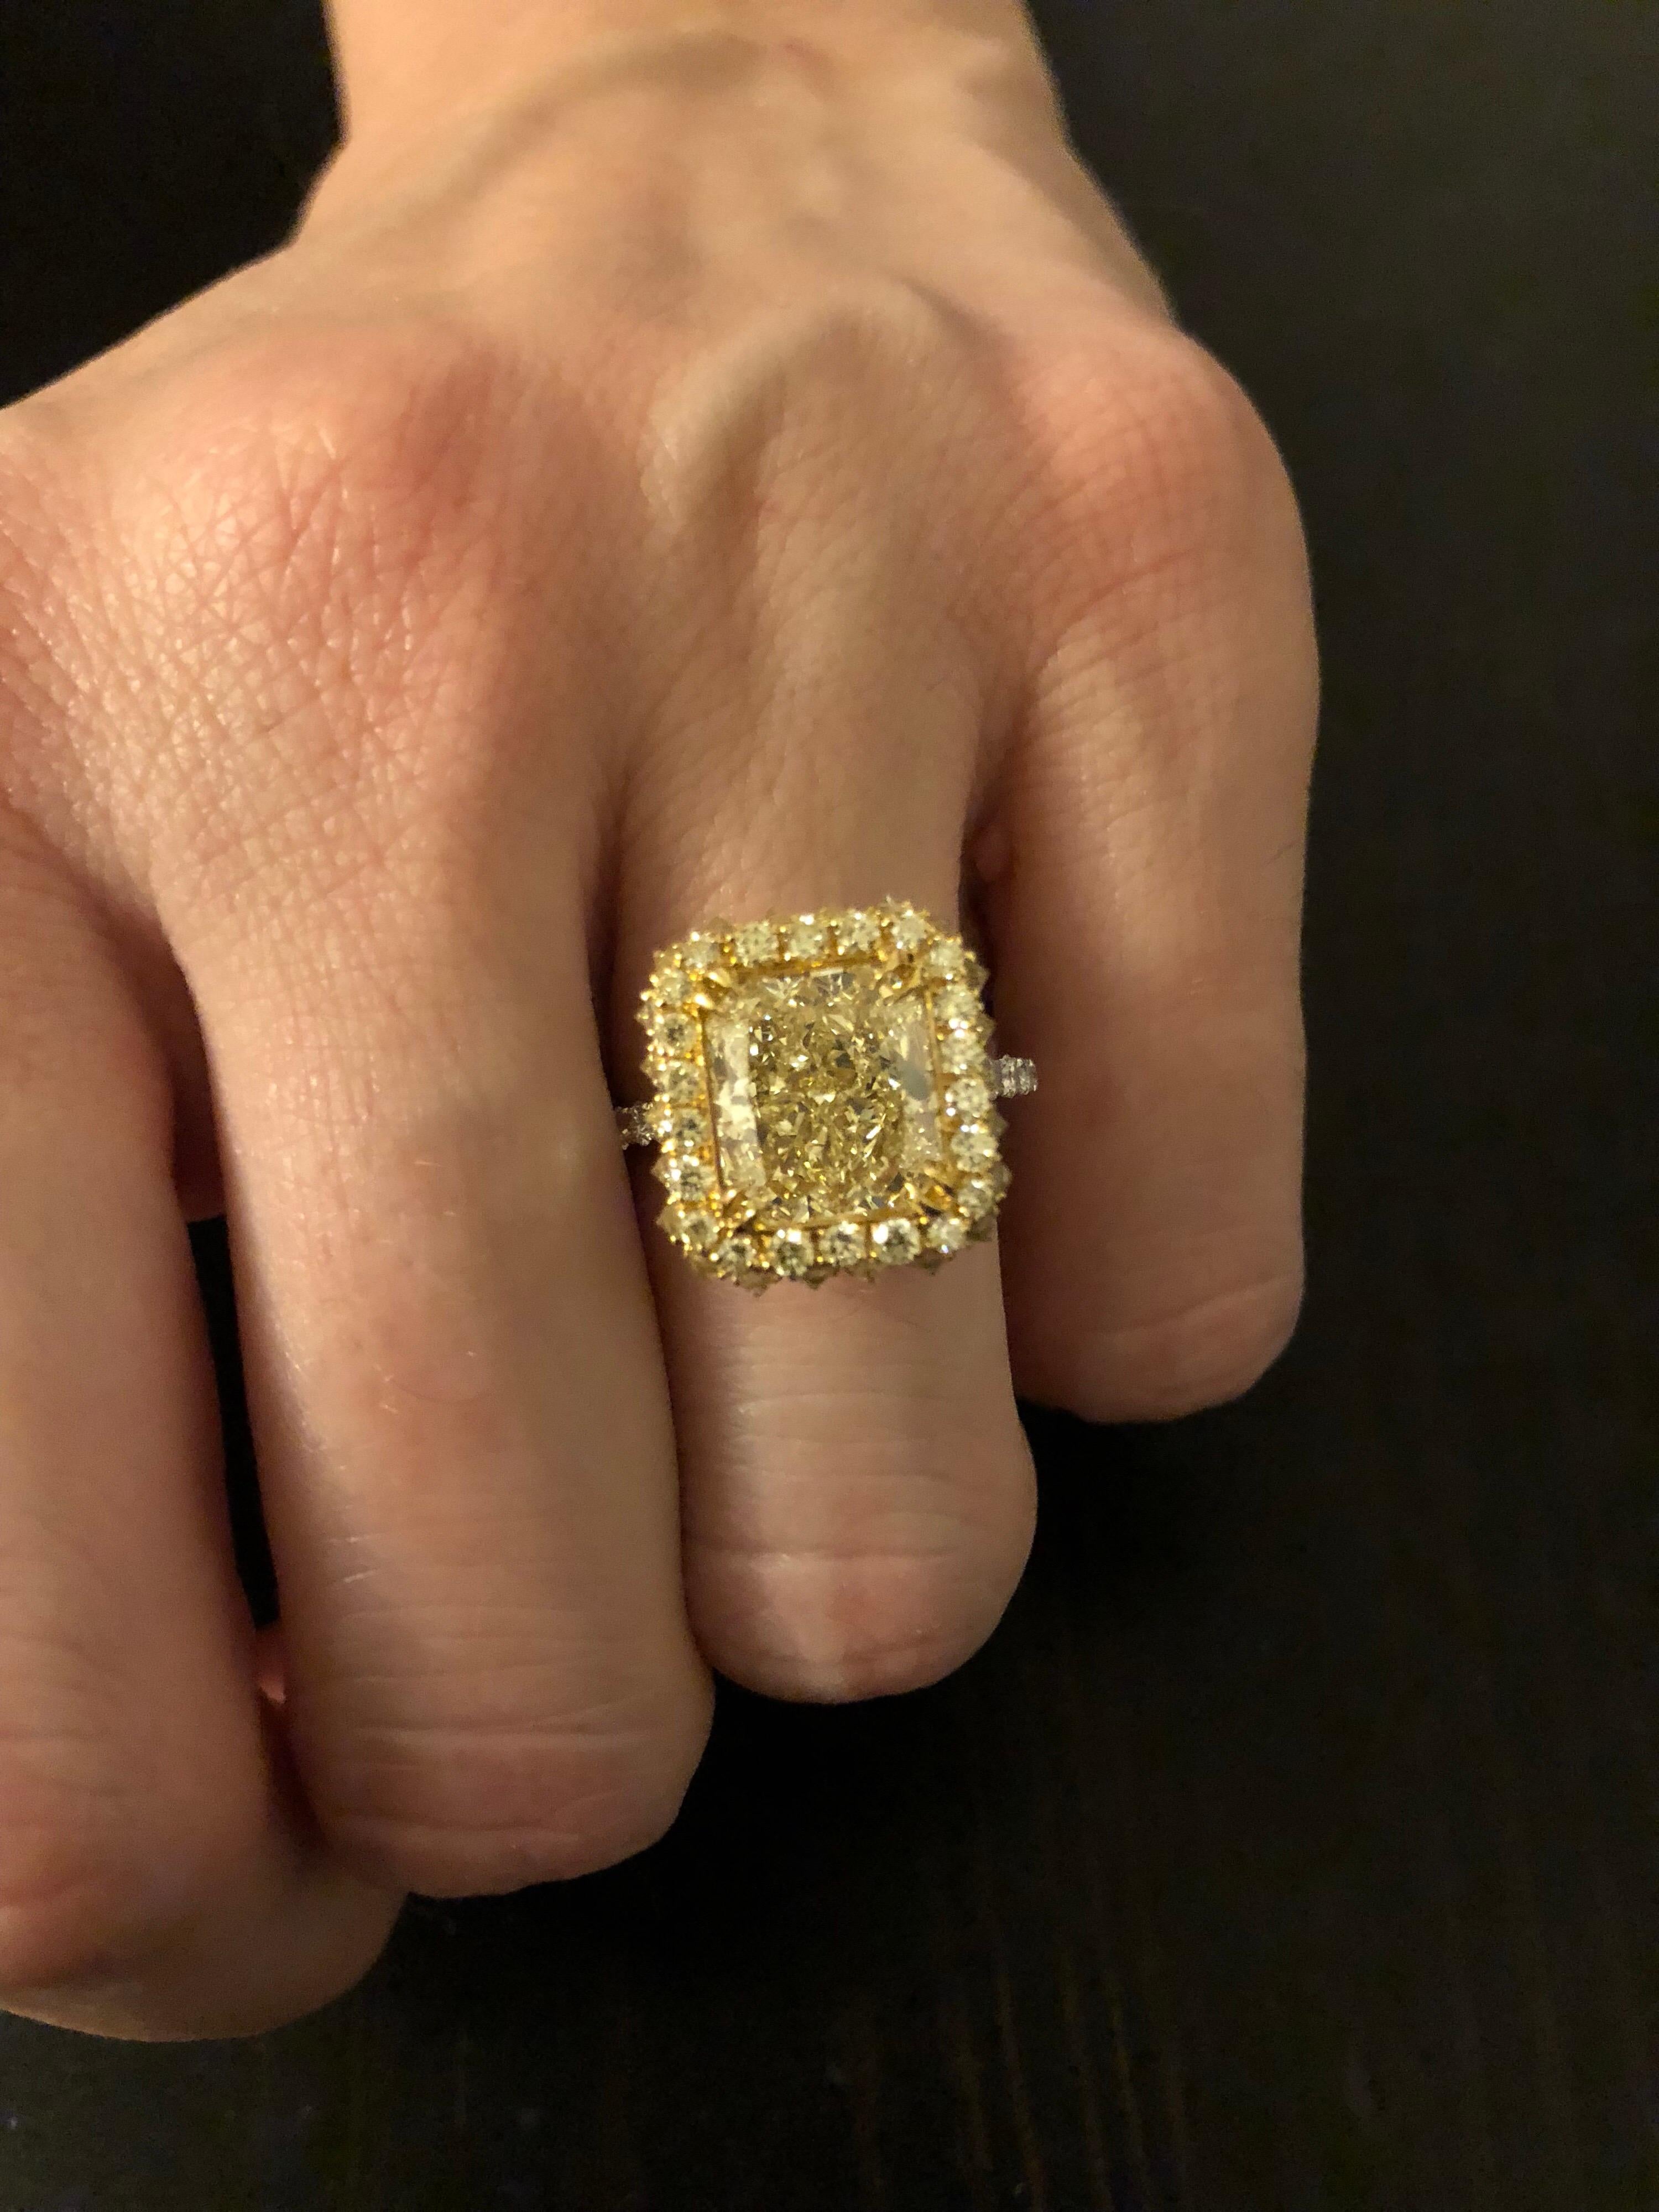 Fancy Light Yellow Diamond Ring 3.78 Carat Radiant Cut GIA Certified For Sale 2